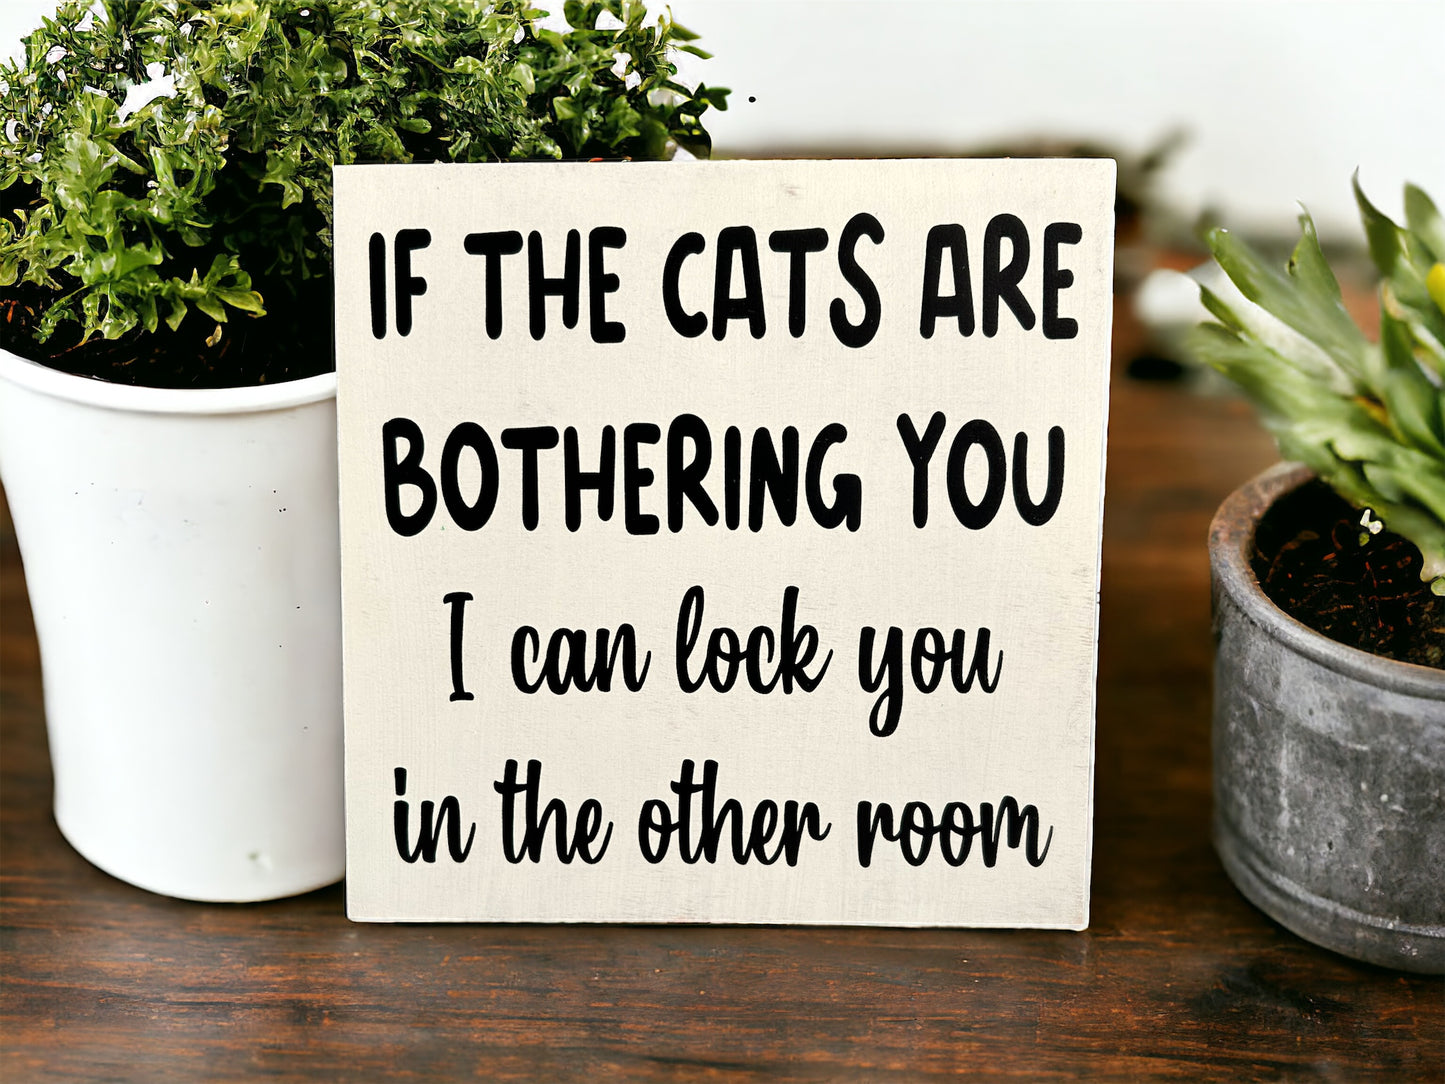 If the Cats are Bothering You - Funny Rustic Wood Sign